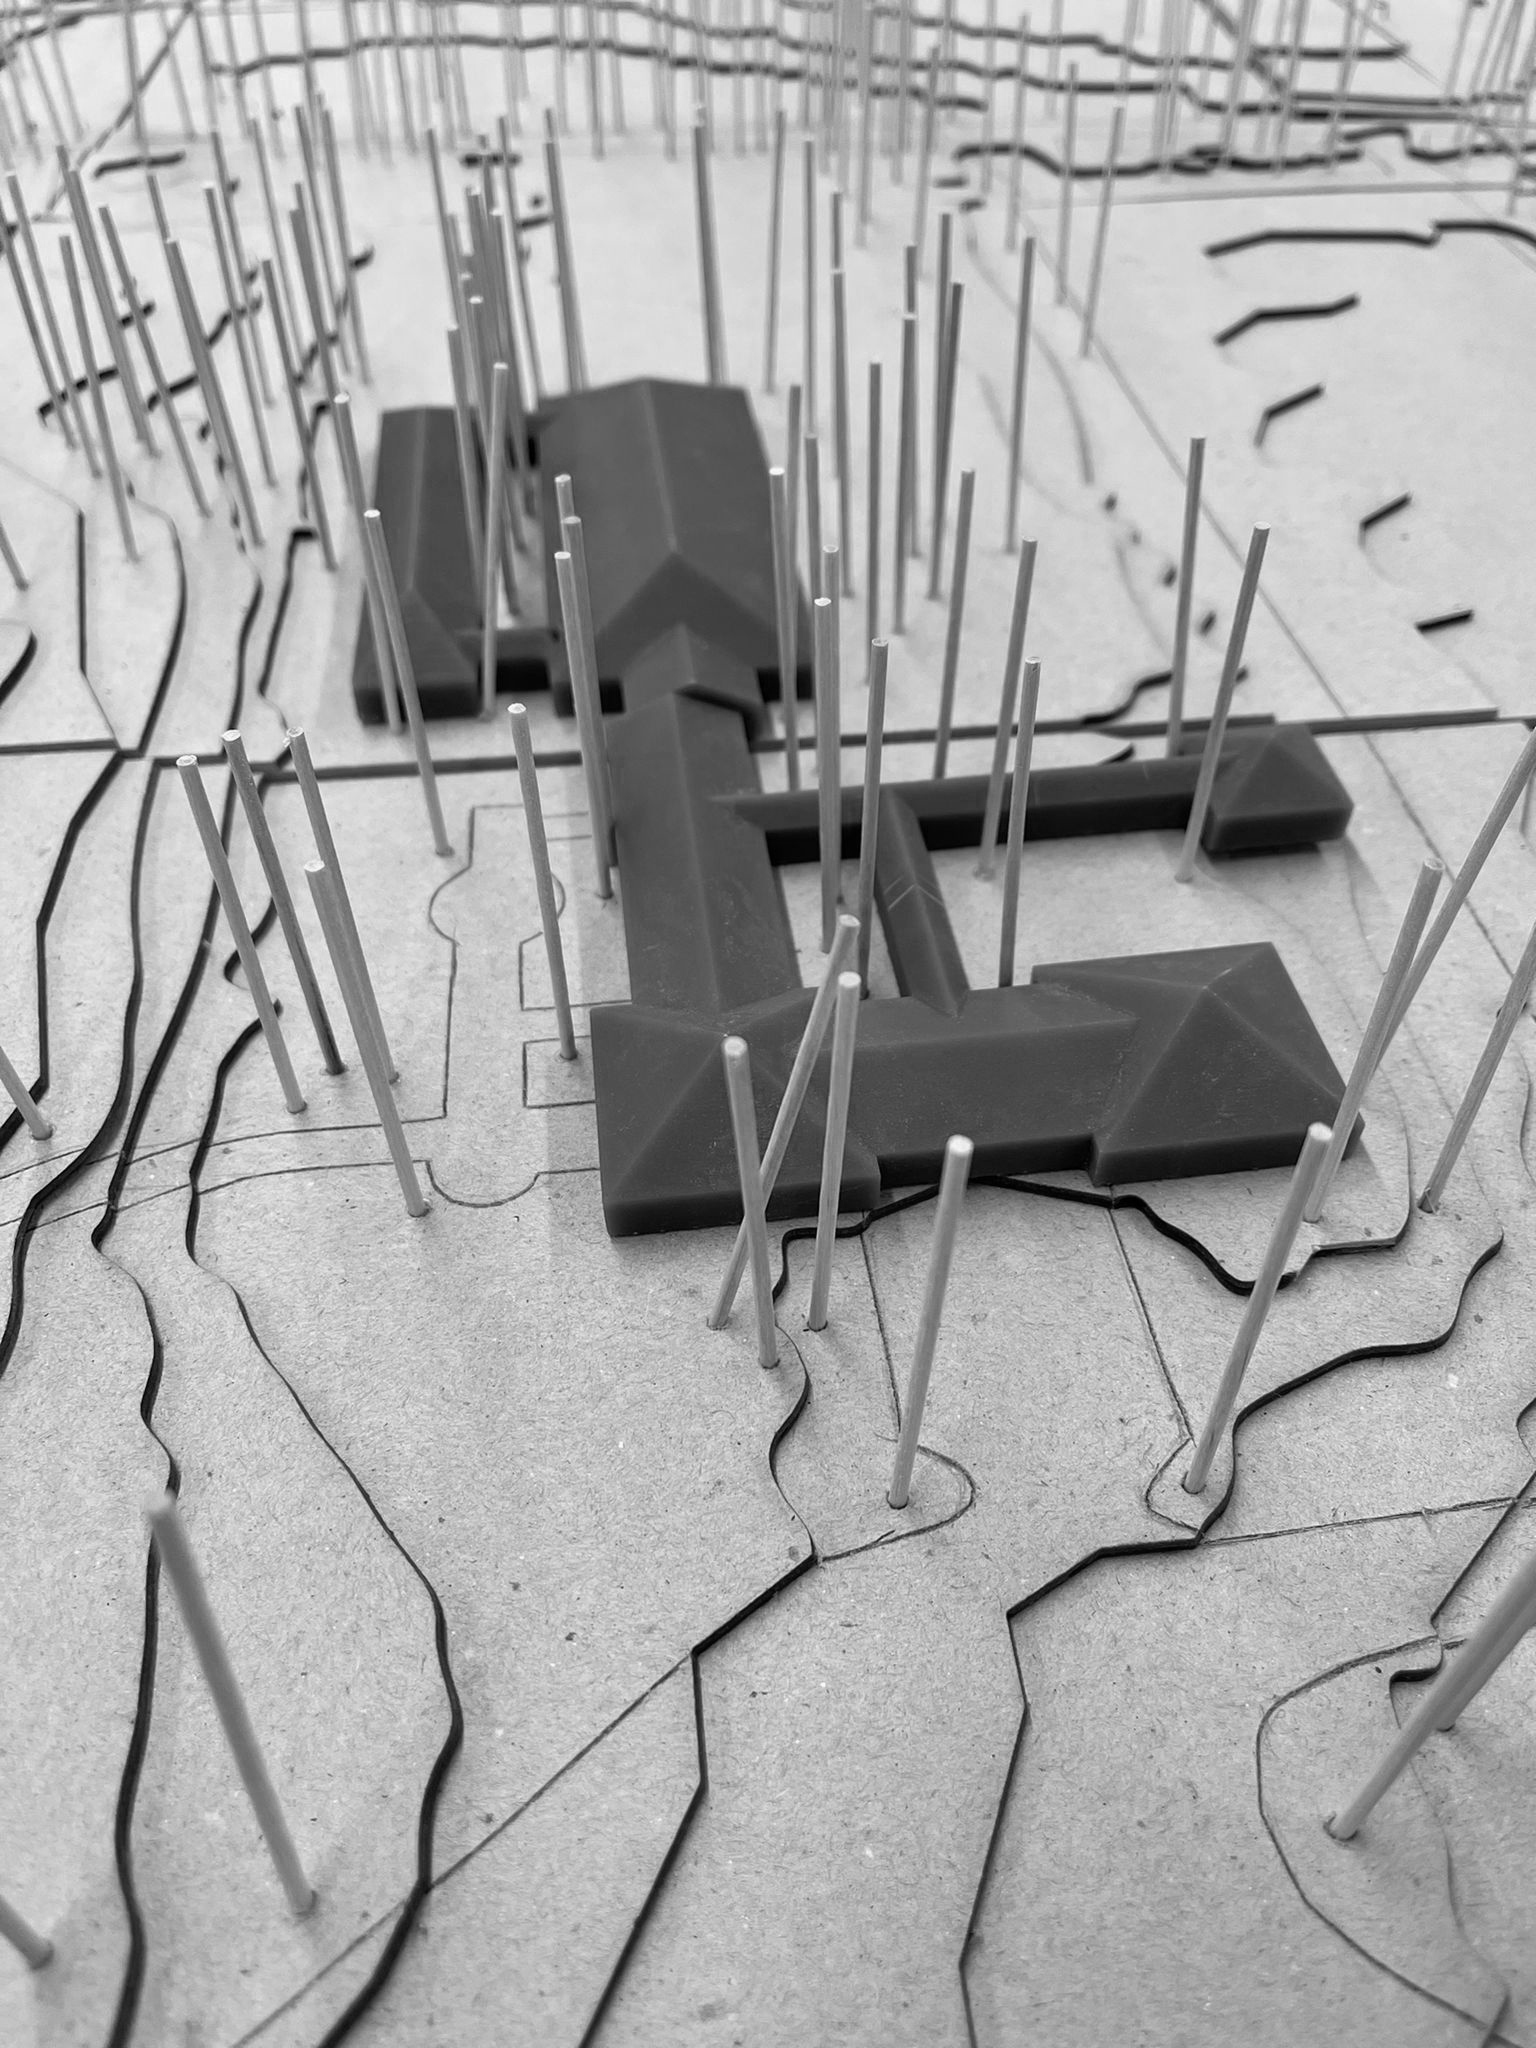 Close up image of a building model with wood sticks representing trees